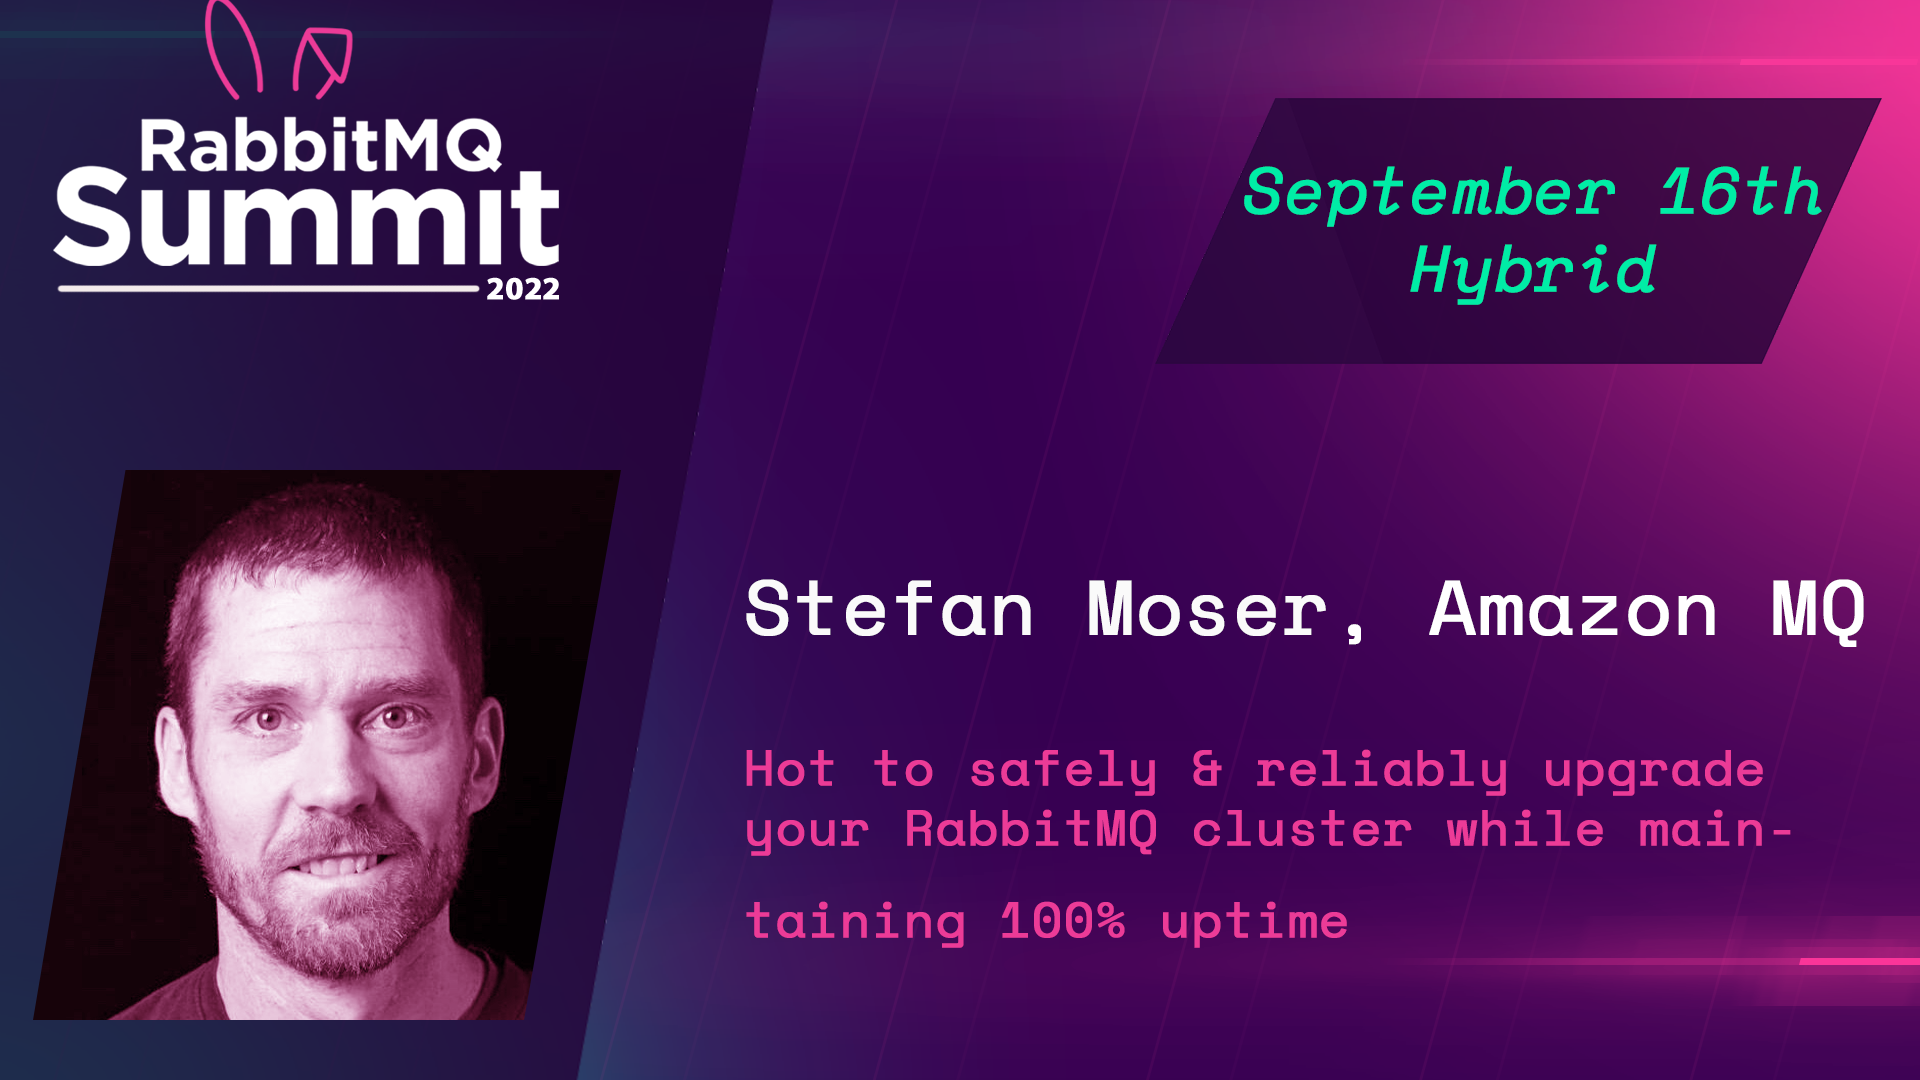 How to Safely and Reliably Upgrade Your RabbitMQ Cluster While Maintaining 100% Uptime - Stefan Moser